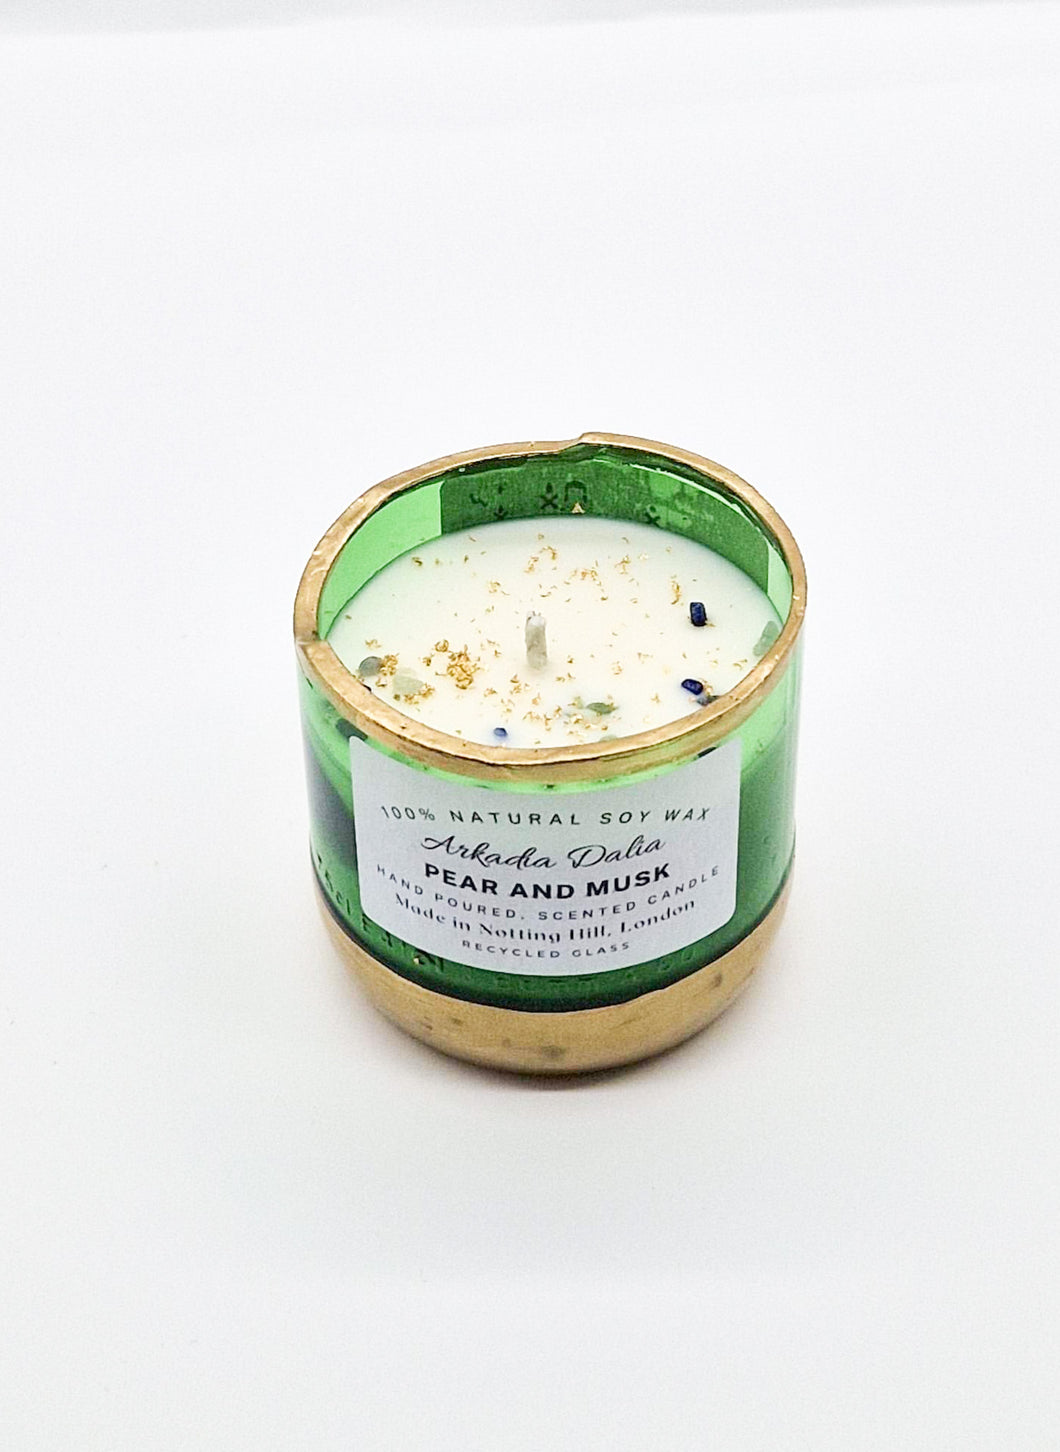 Medium Pear and Musk Light Green Candle.